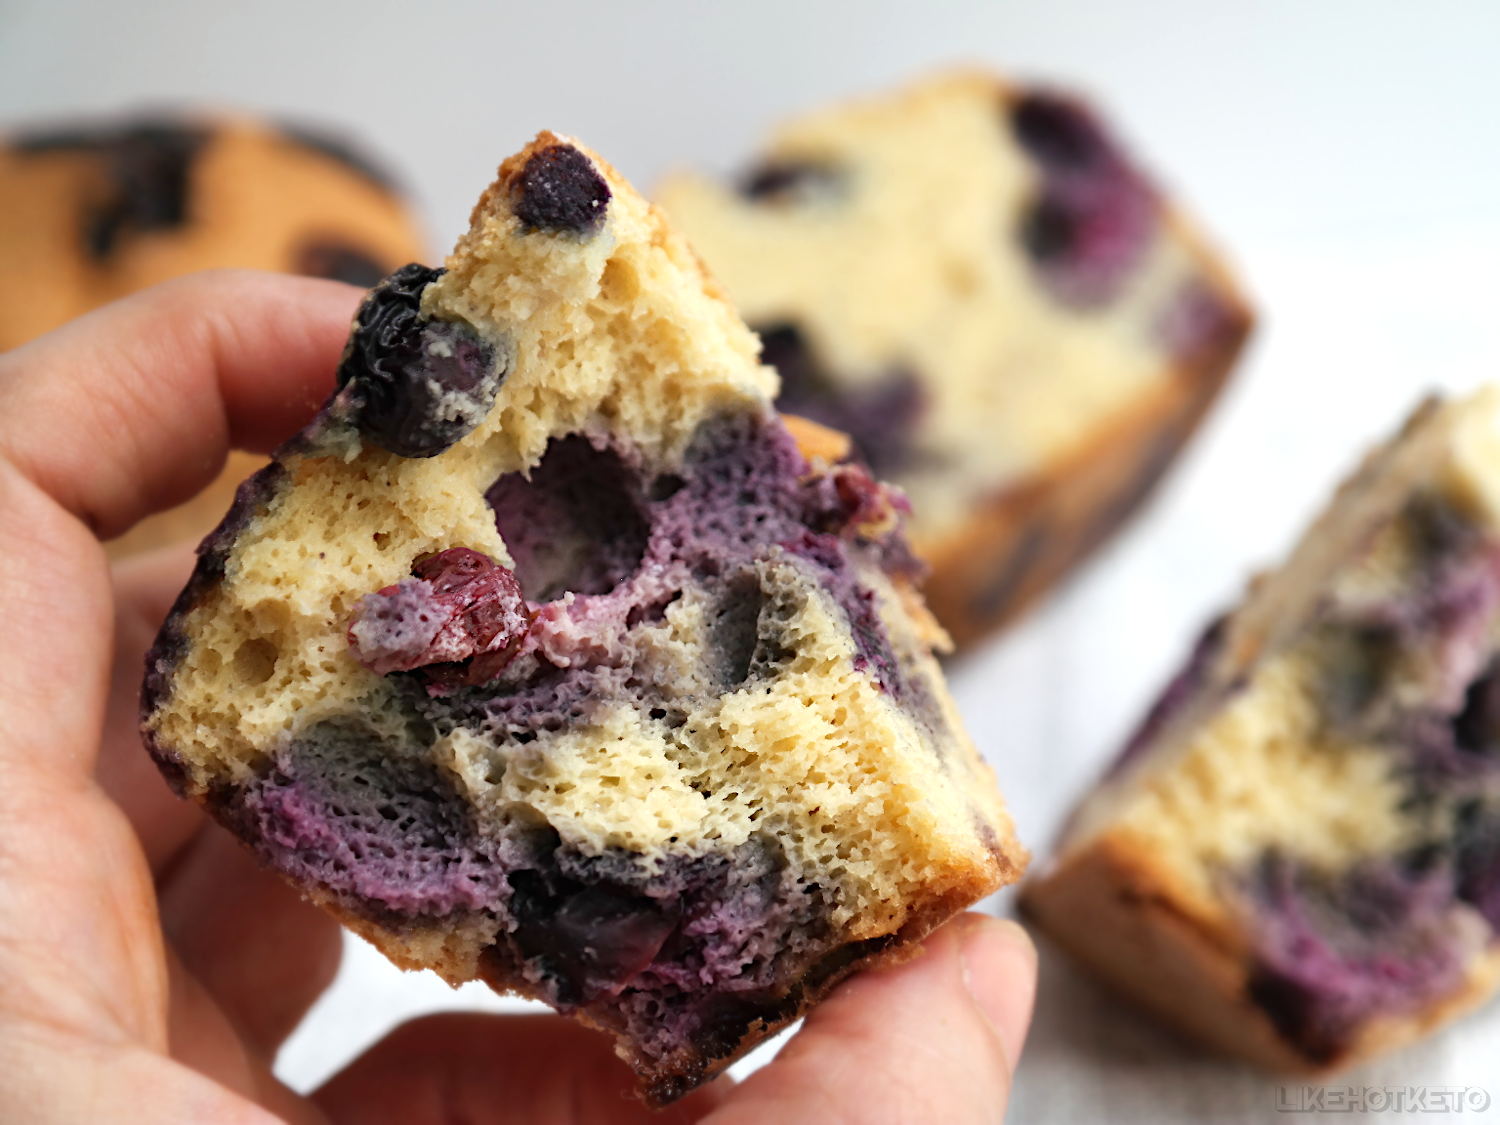 Halved blueberry muffin with beautiful fluffly crumb and lots of blueberries filling.